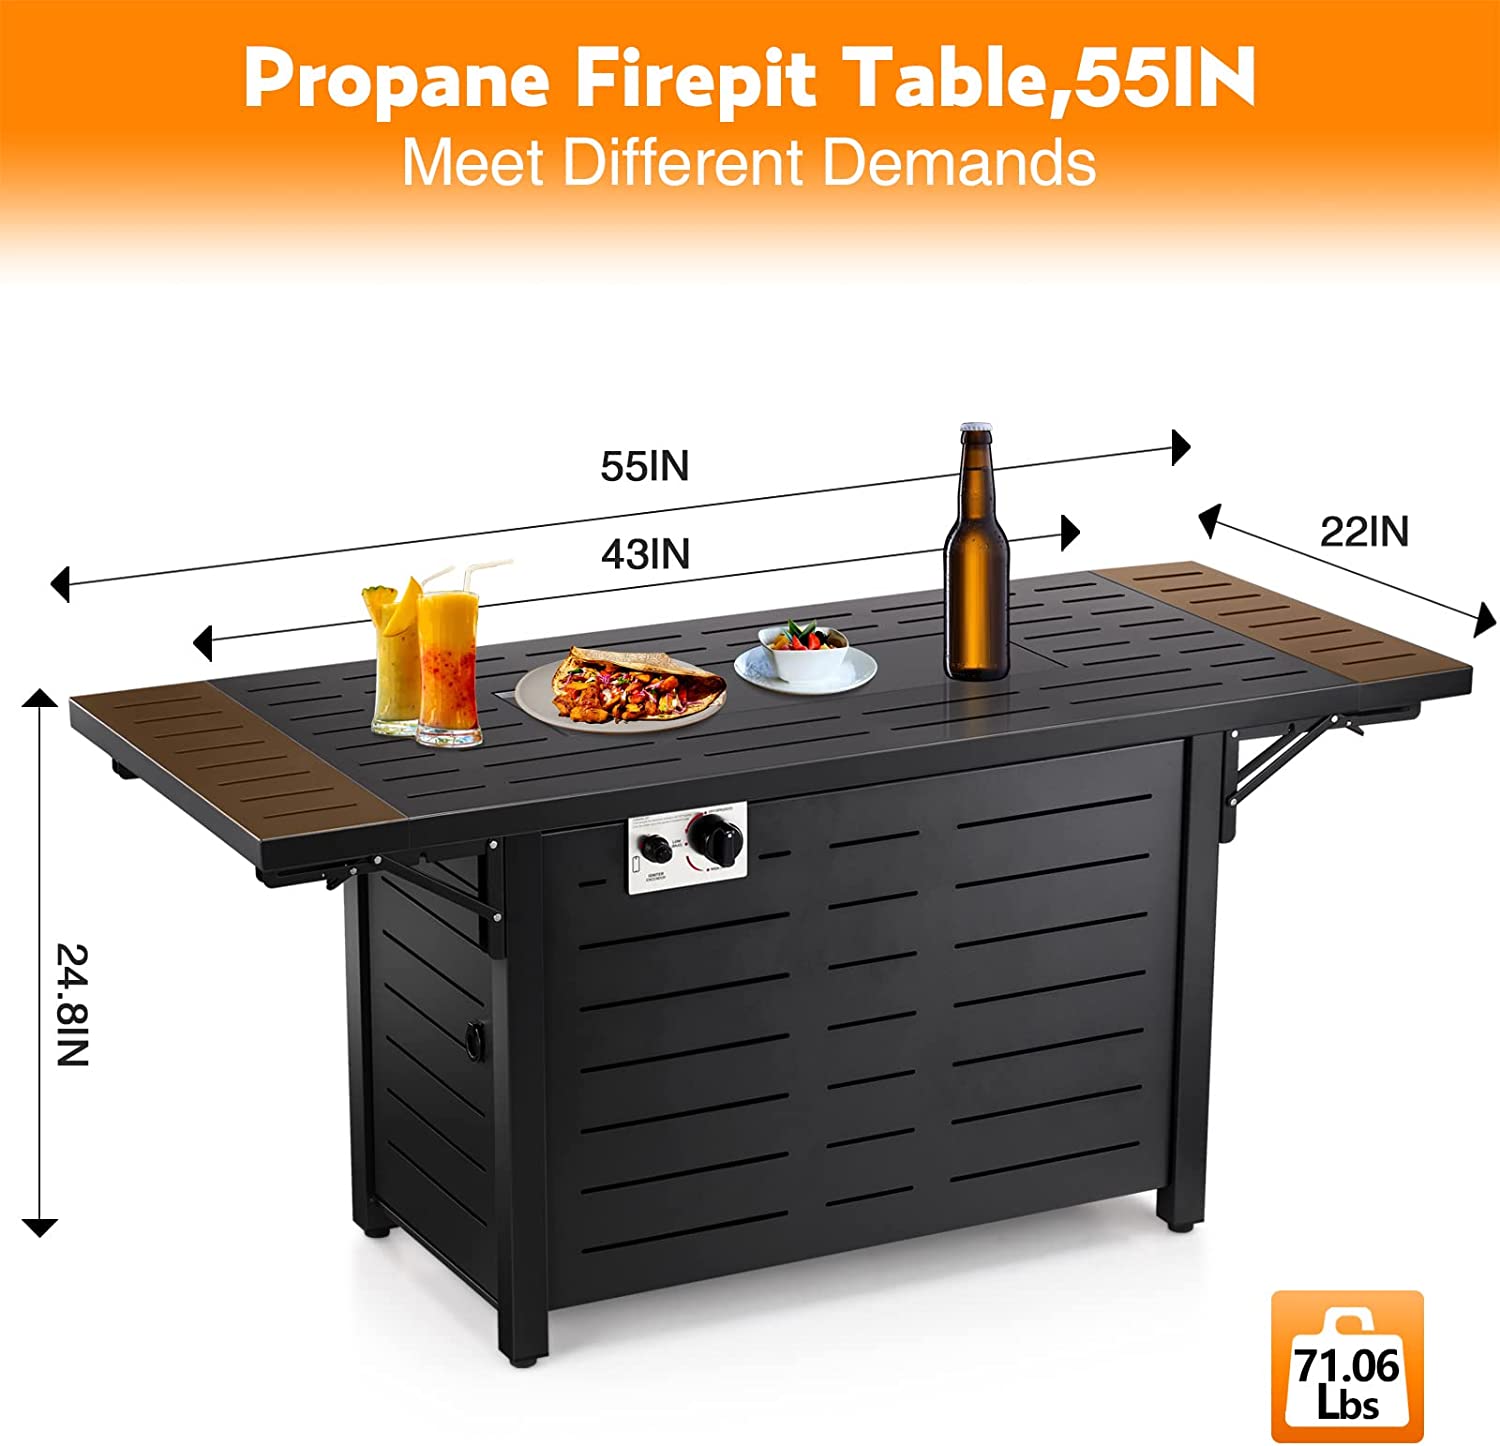 R.W.FLAME Propane Fire Pit Table 54in Foldable,50000 BTU